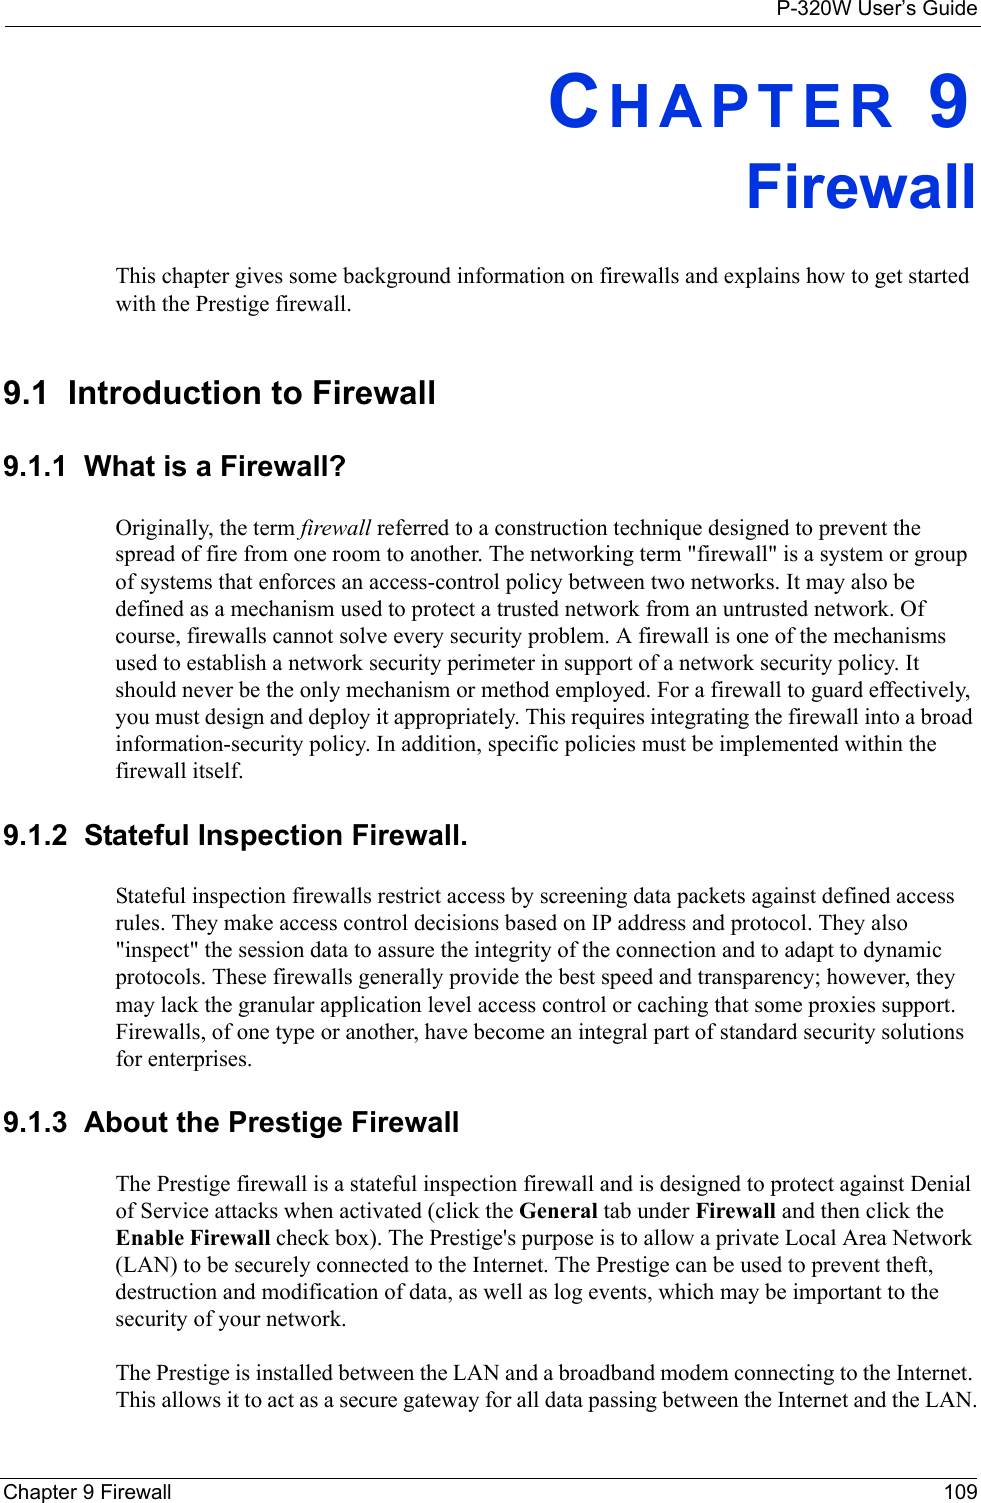 P-320W User’s GuideChapter 9 Firewall 109CHAPTER 9 FirewallThis chapter gives some background information on firewalls and explains how to get started with the Prestige firewall.9.1  Introduction to Firewall9.1.1  What is a Firewall?Originally, the term firewall referred to a construction technique designed to prevent the spread of fire from one room to another. The networking term &quot;firewall&quot; is a system or group of systems that enforces an access-control policy between two networks. It may also be defined as a mechanism used to protect a trusted network from an untrusted network. Of course, firewalls cannot solve every security problem. A firewall is one of the mechanisms used to establish a network security perimeter in support of a network security policy. It should never be the only mechanism or method employed. For a firewall to guard effectively, you must design and deploy it appropriately. This requires integrating the firewall into a broad information-security policy. In addition, specific policies must be implemented within the firewall itself. 9.1.2  Stateful Inspection Firewall. Stateful inspection firewalls restrict access by screening data packets against defined access rules. They make access control decisions based on IP address and protocol. They also &quot;inspect&quot; the session data to assure the integrity of the connection and to adapt to dynamic protocols. These firewalls generally provide the best speed and transparency; however, they may lack the granular application level access control or caching that some proxies support. Firewalls, of one type or another, have become an integral part of standard security solutions for enterprises.9.1.3  About the Prestige FirewallThe Prestige firewall is a stateful inspection firewall and is designed to protect against Denial of Service attacks when activated (click the General tab under Firewall and then click the Enable Firewall check box). The Prestige&apos;s purpose is to allow a private Local Area Network (LAN) to be securely connected to the Internet. The Prestige can be used to prevent theft, destruction and modification of data, as well as log events, which may be important to the security of your network. The Prestige is installed between the LAN and a broadband modem connecting to the Internet. This allows it to act as a secure gateway for all data passing between the Internet and the LAN.